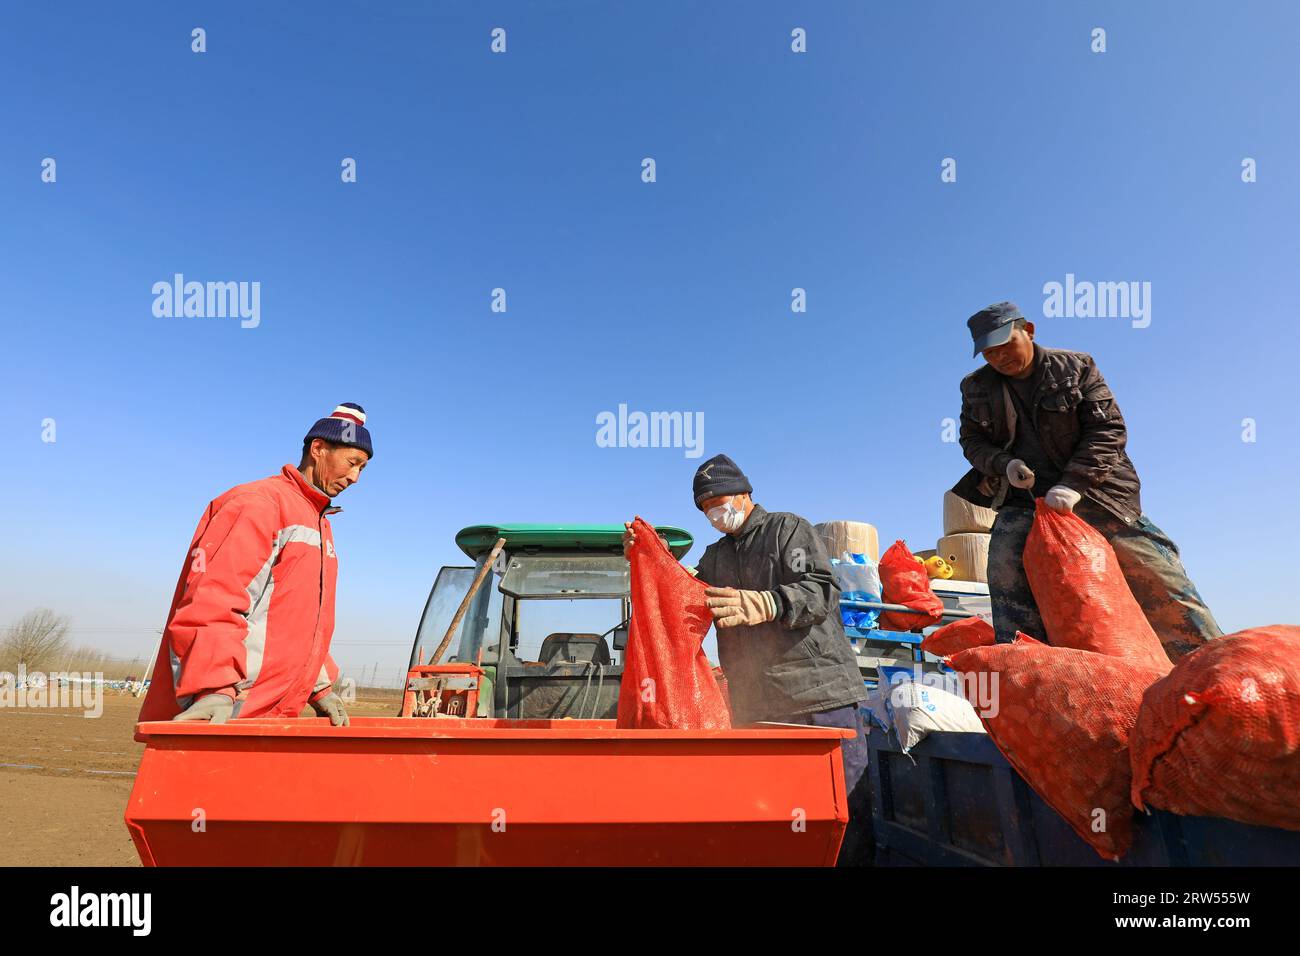 LUANNAN COUNTY, Hebei Province, China - March 16, 2021: Farmers are adding potato chips to the planter Stock Photo